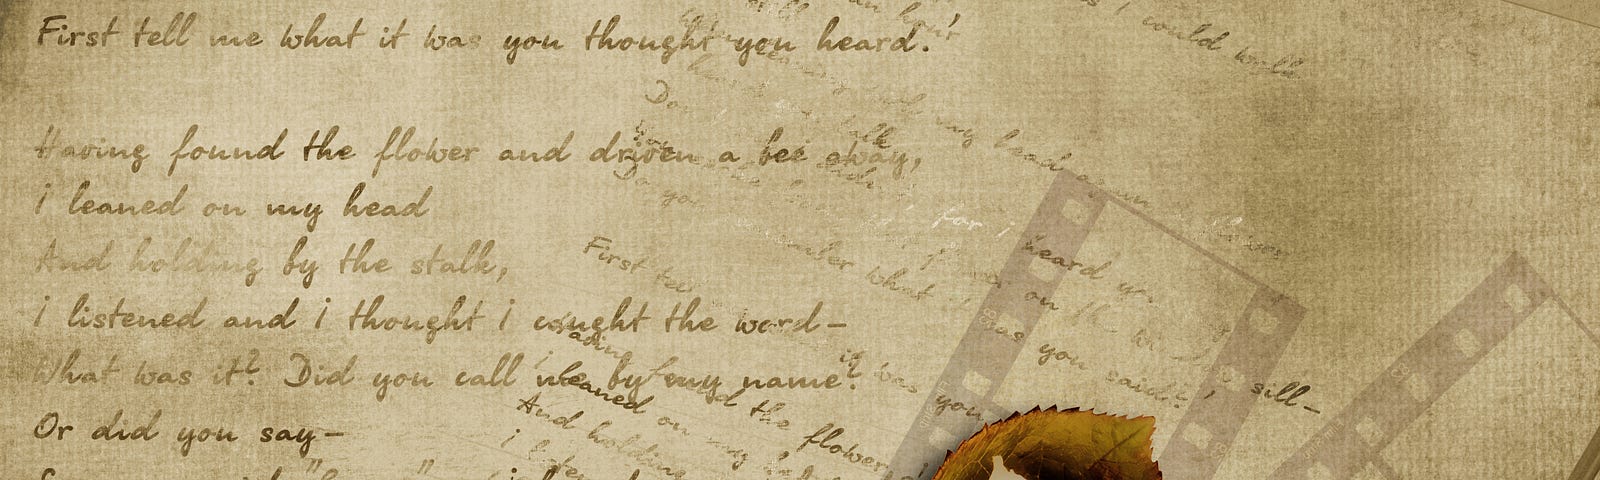 Vintage writing on sepia paper with a white rose in the foreground